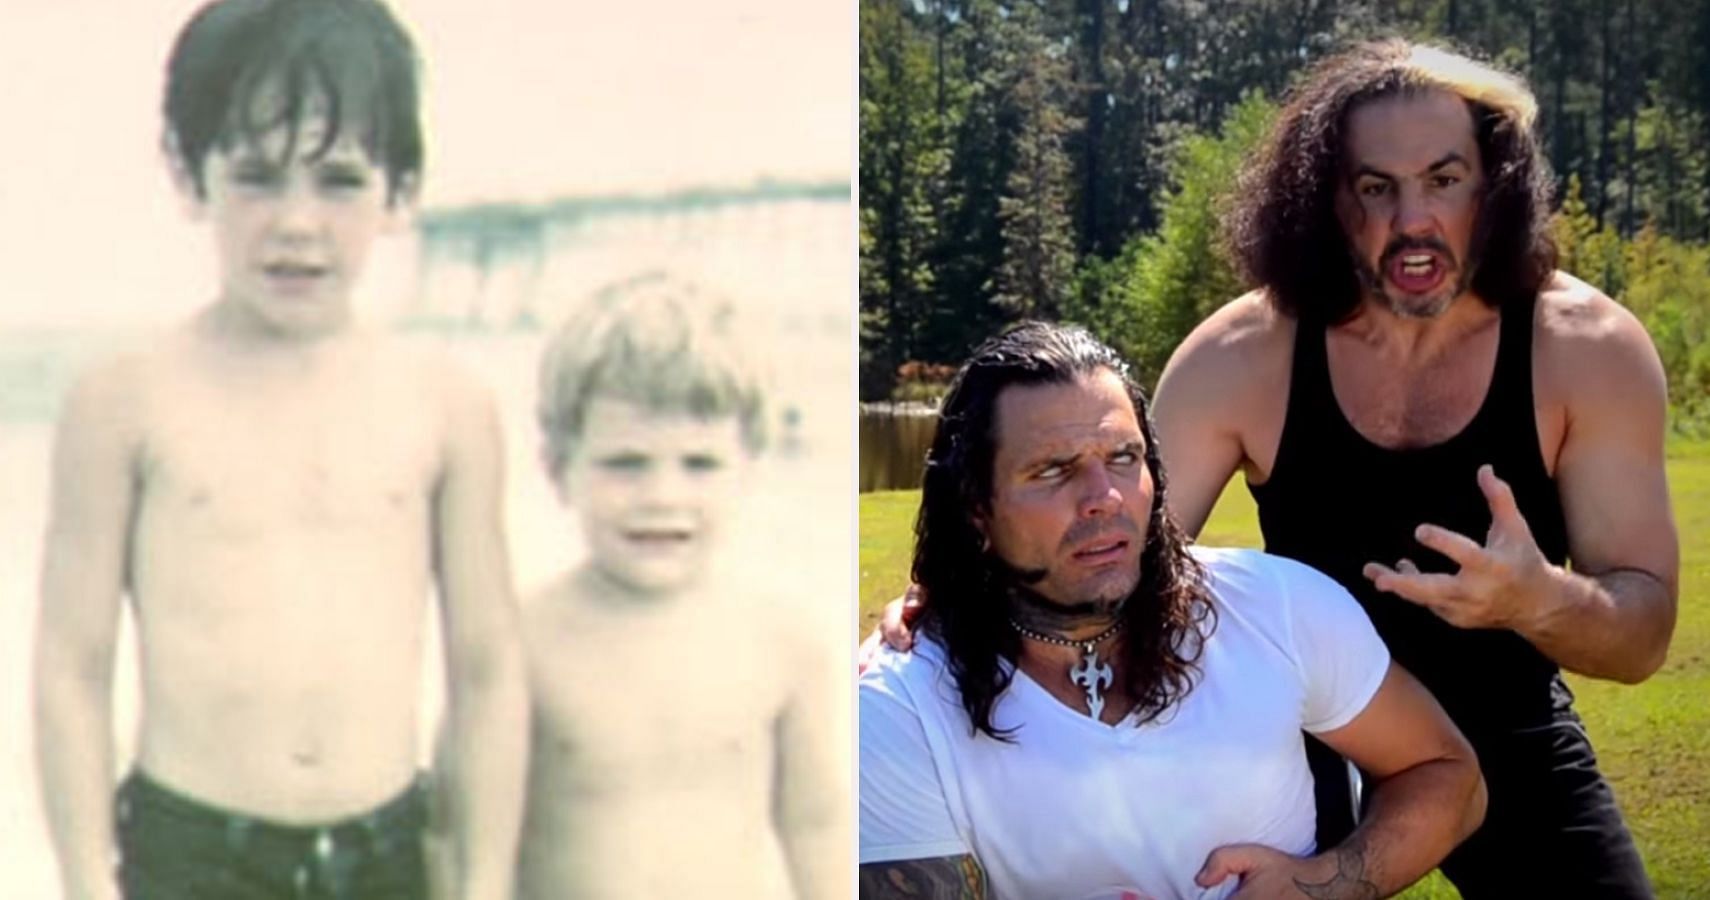 The Hardys as children (left), The brothers during their TNA runs (right).